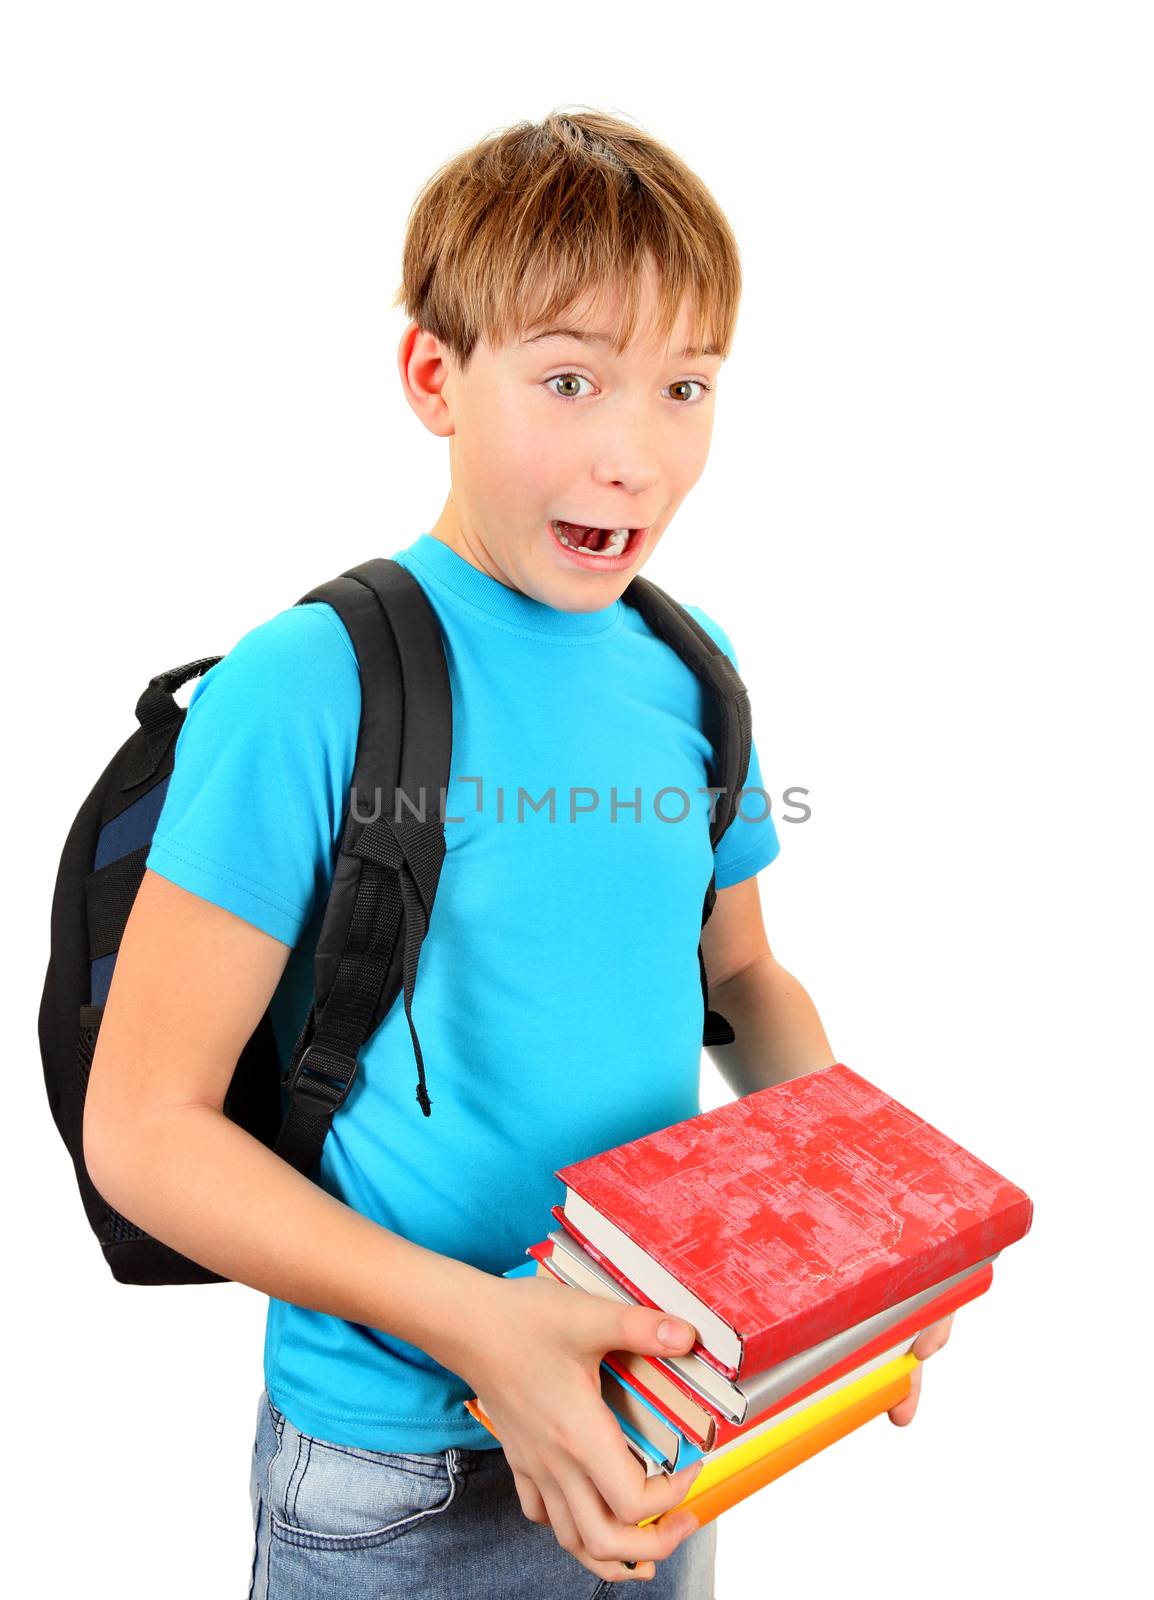 Surprised Schoolboy with a Books by sabphoto